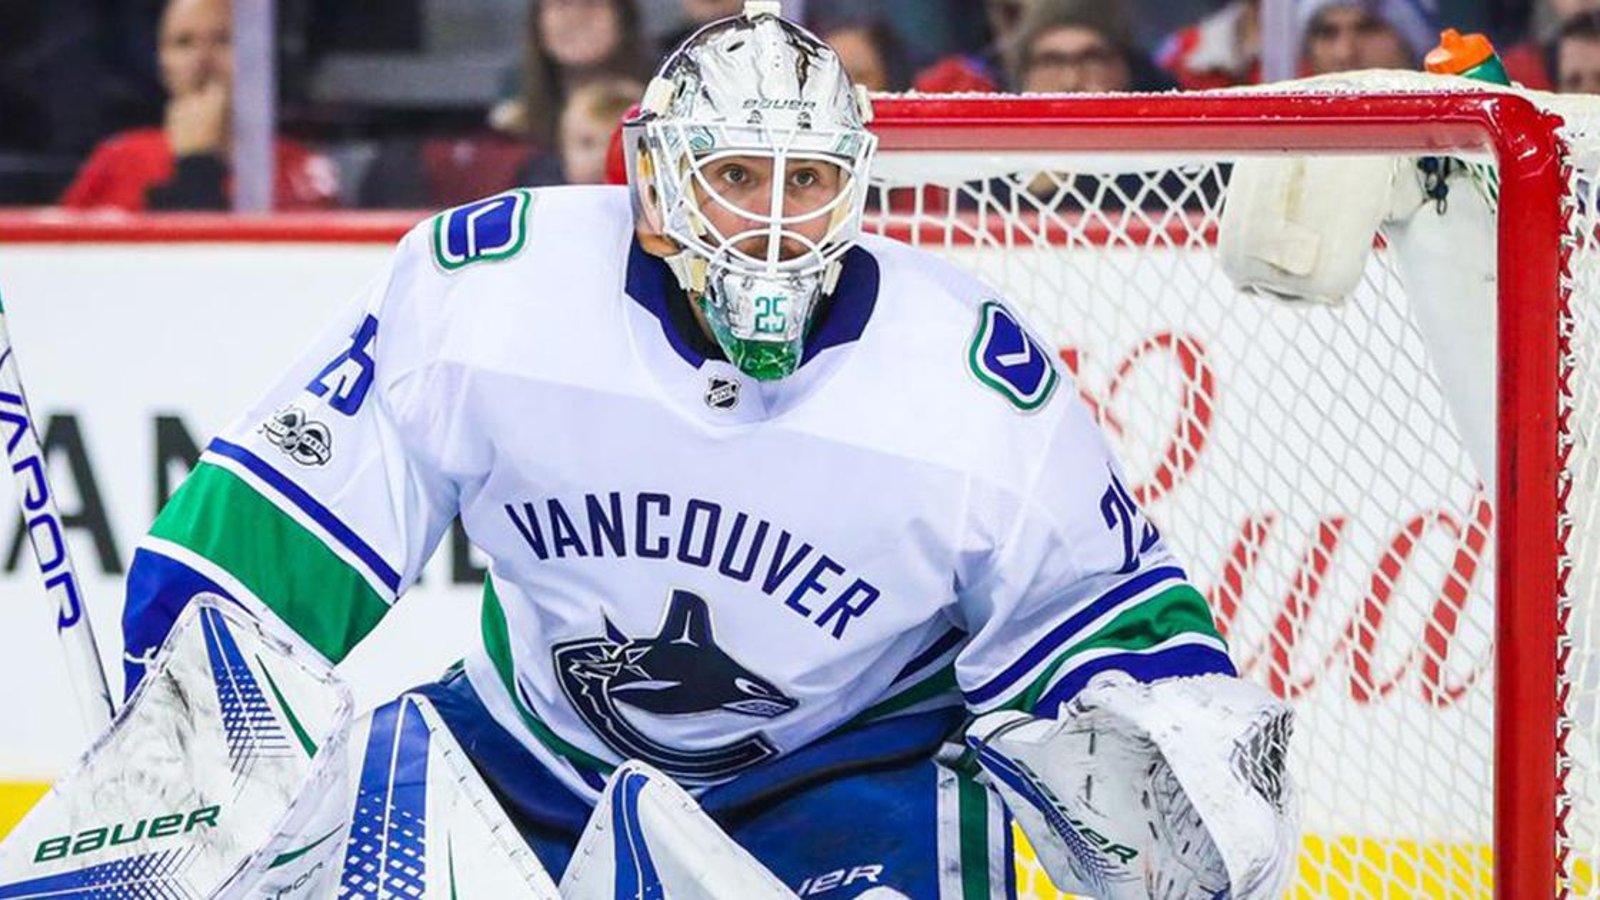 Your Call: Is Markstrom a legit #1 goalie?